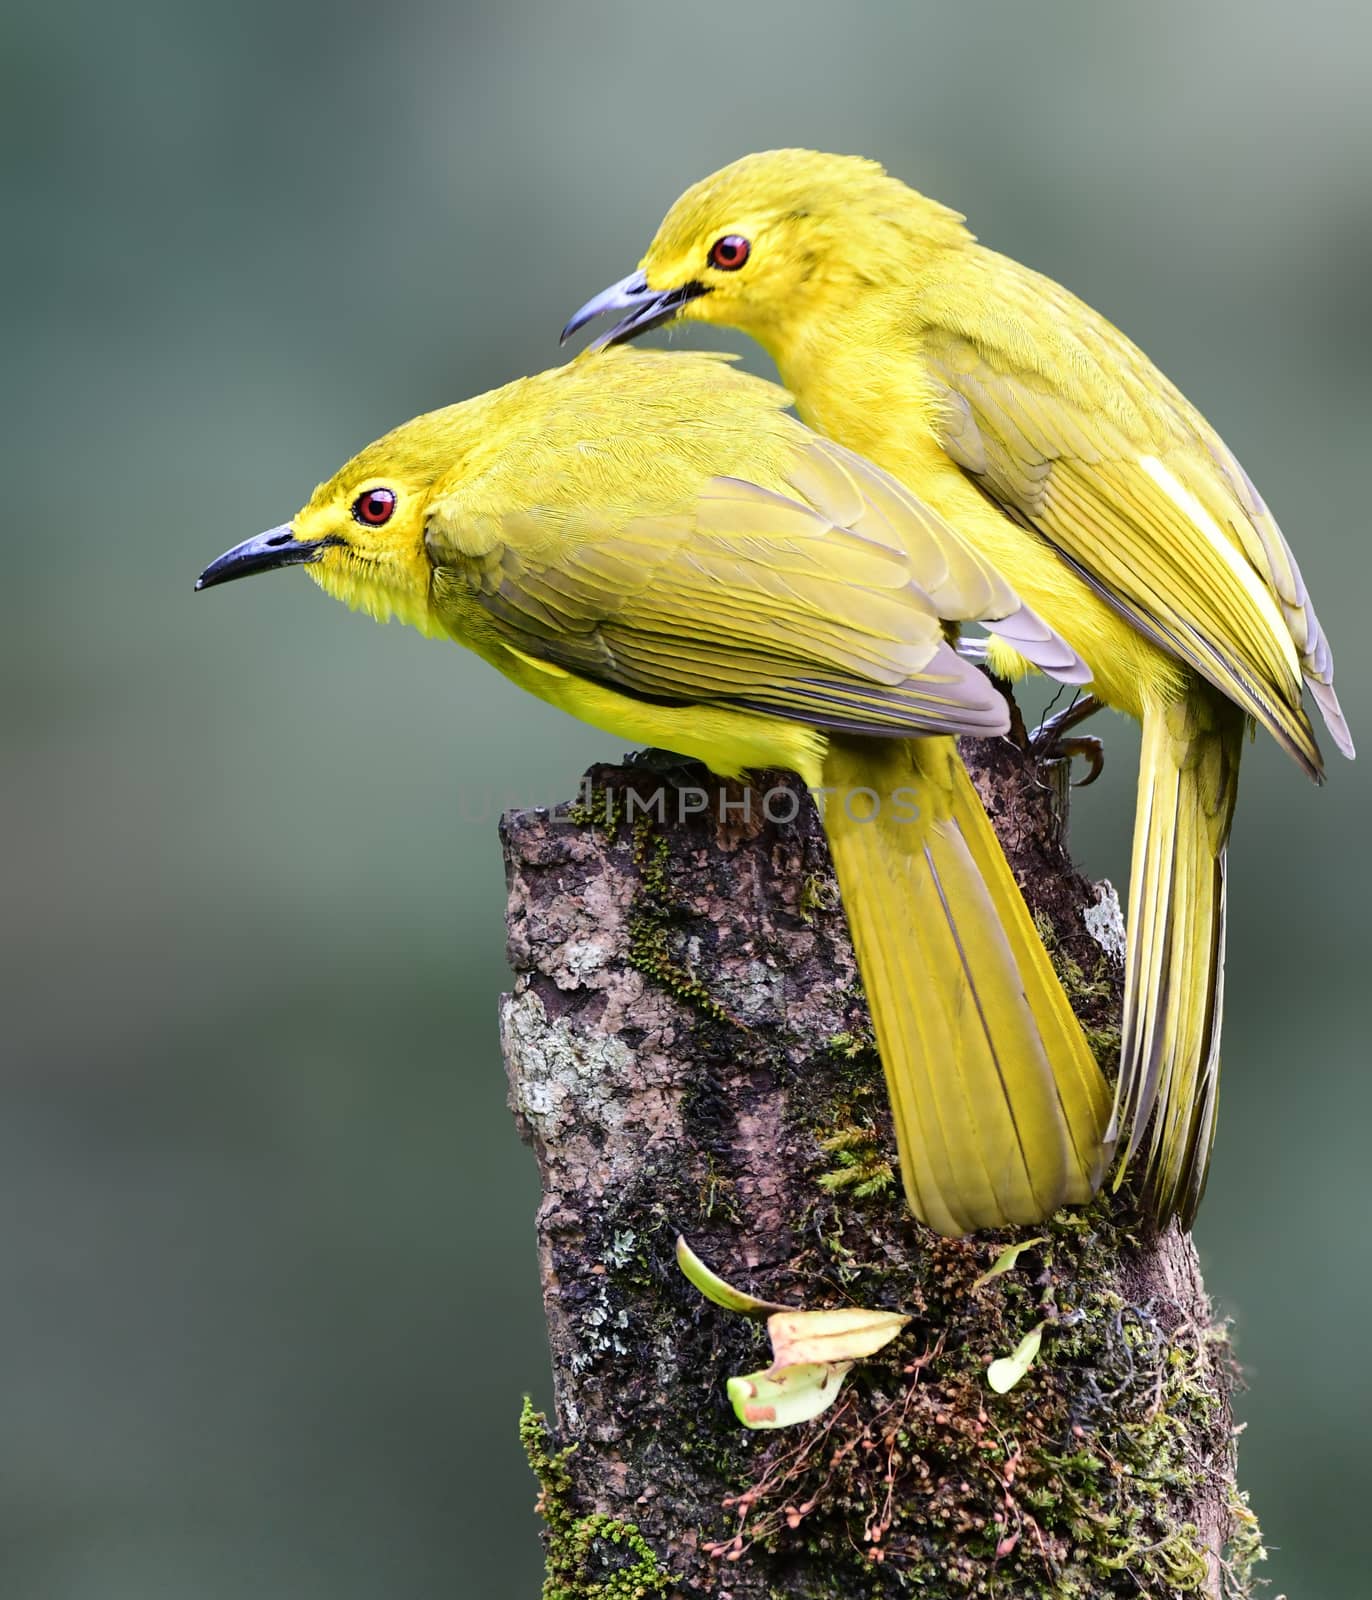 The yellow-browed bulbul, or golden-browed bulbul, is a species of songbird in the bulbul family, Pycnonotidae. It is found in the forests of southern India and Sri Lanka.